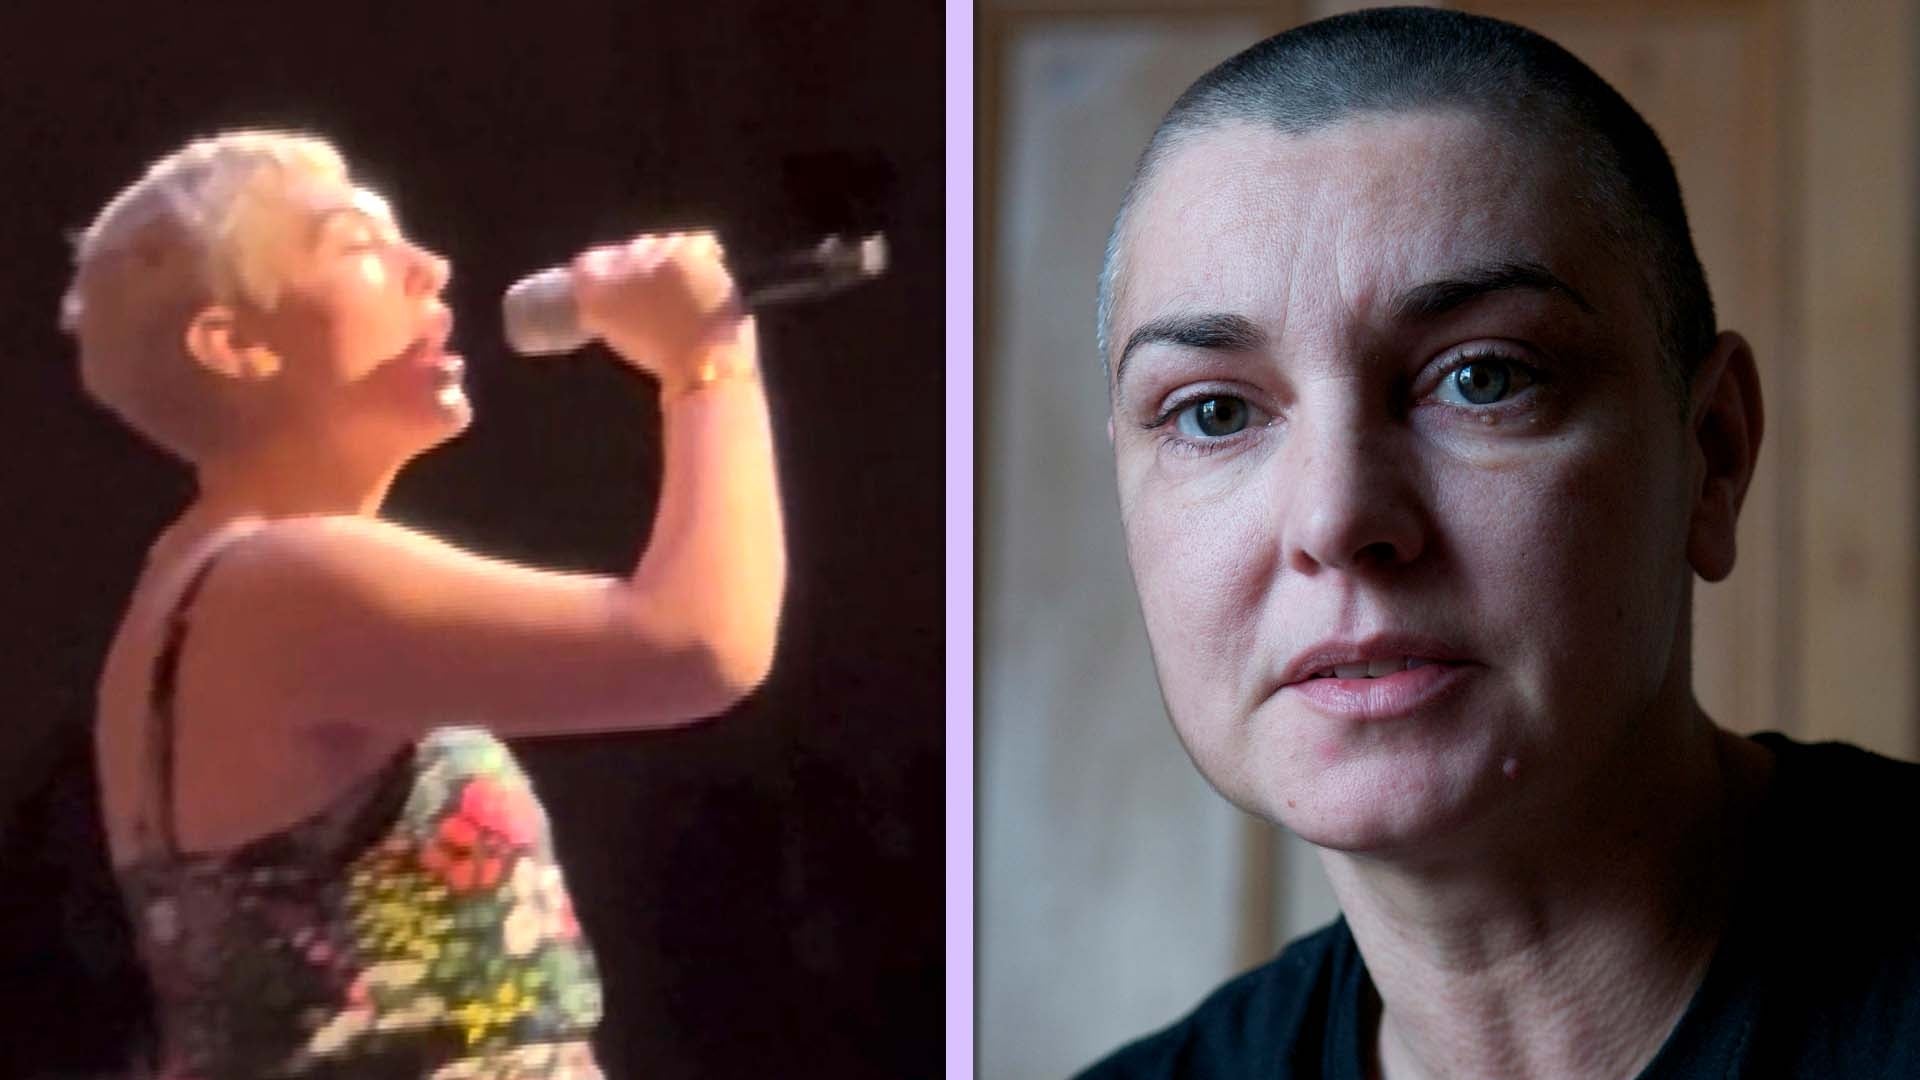 Sinéad O'Connor's Daughter Delivers Emotional Rendition of 'Nothing Compares 2 U'